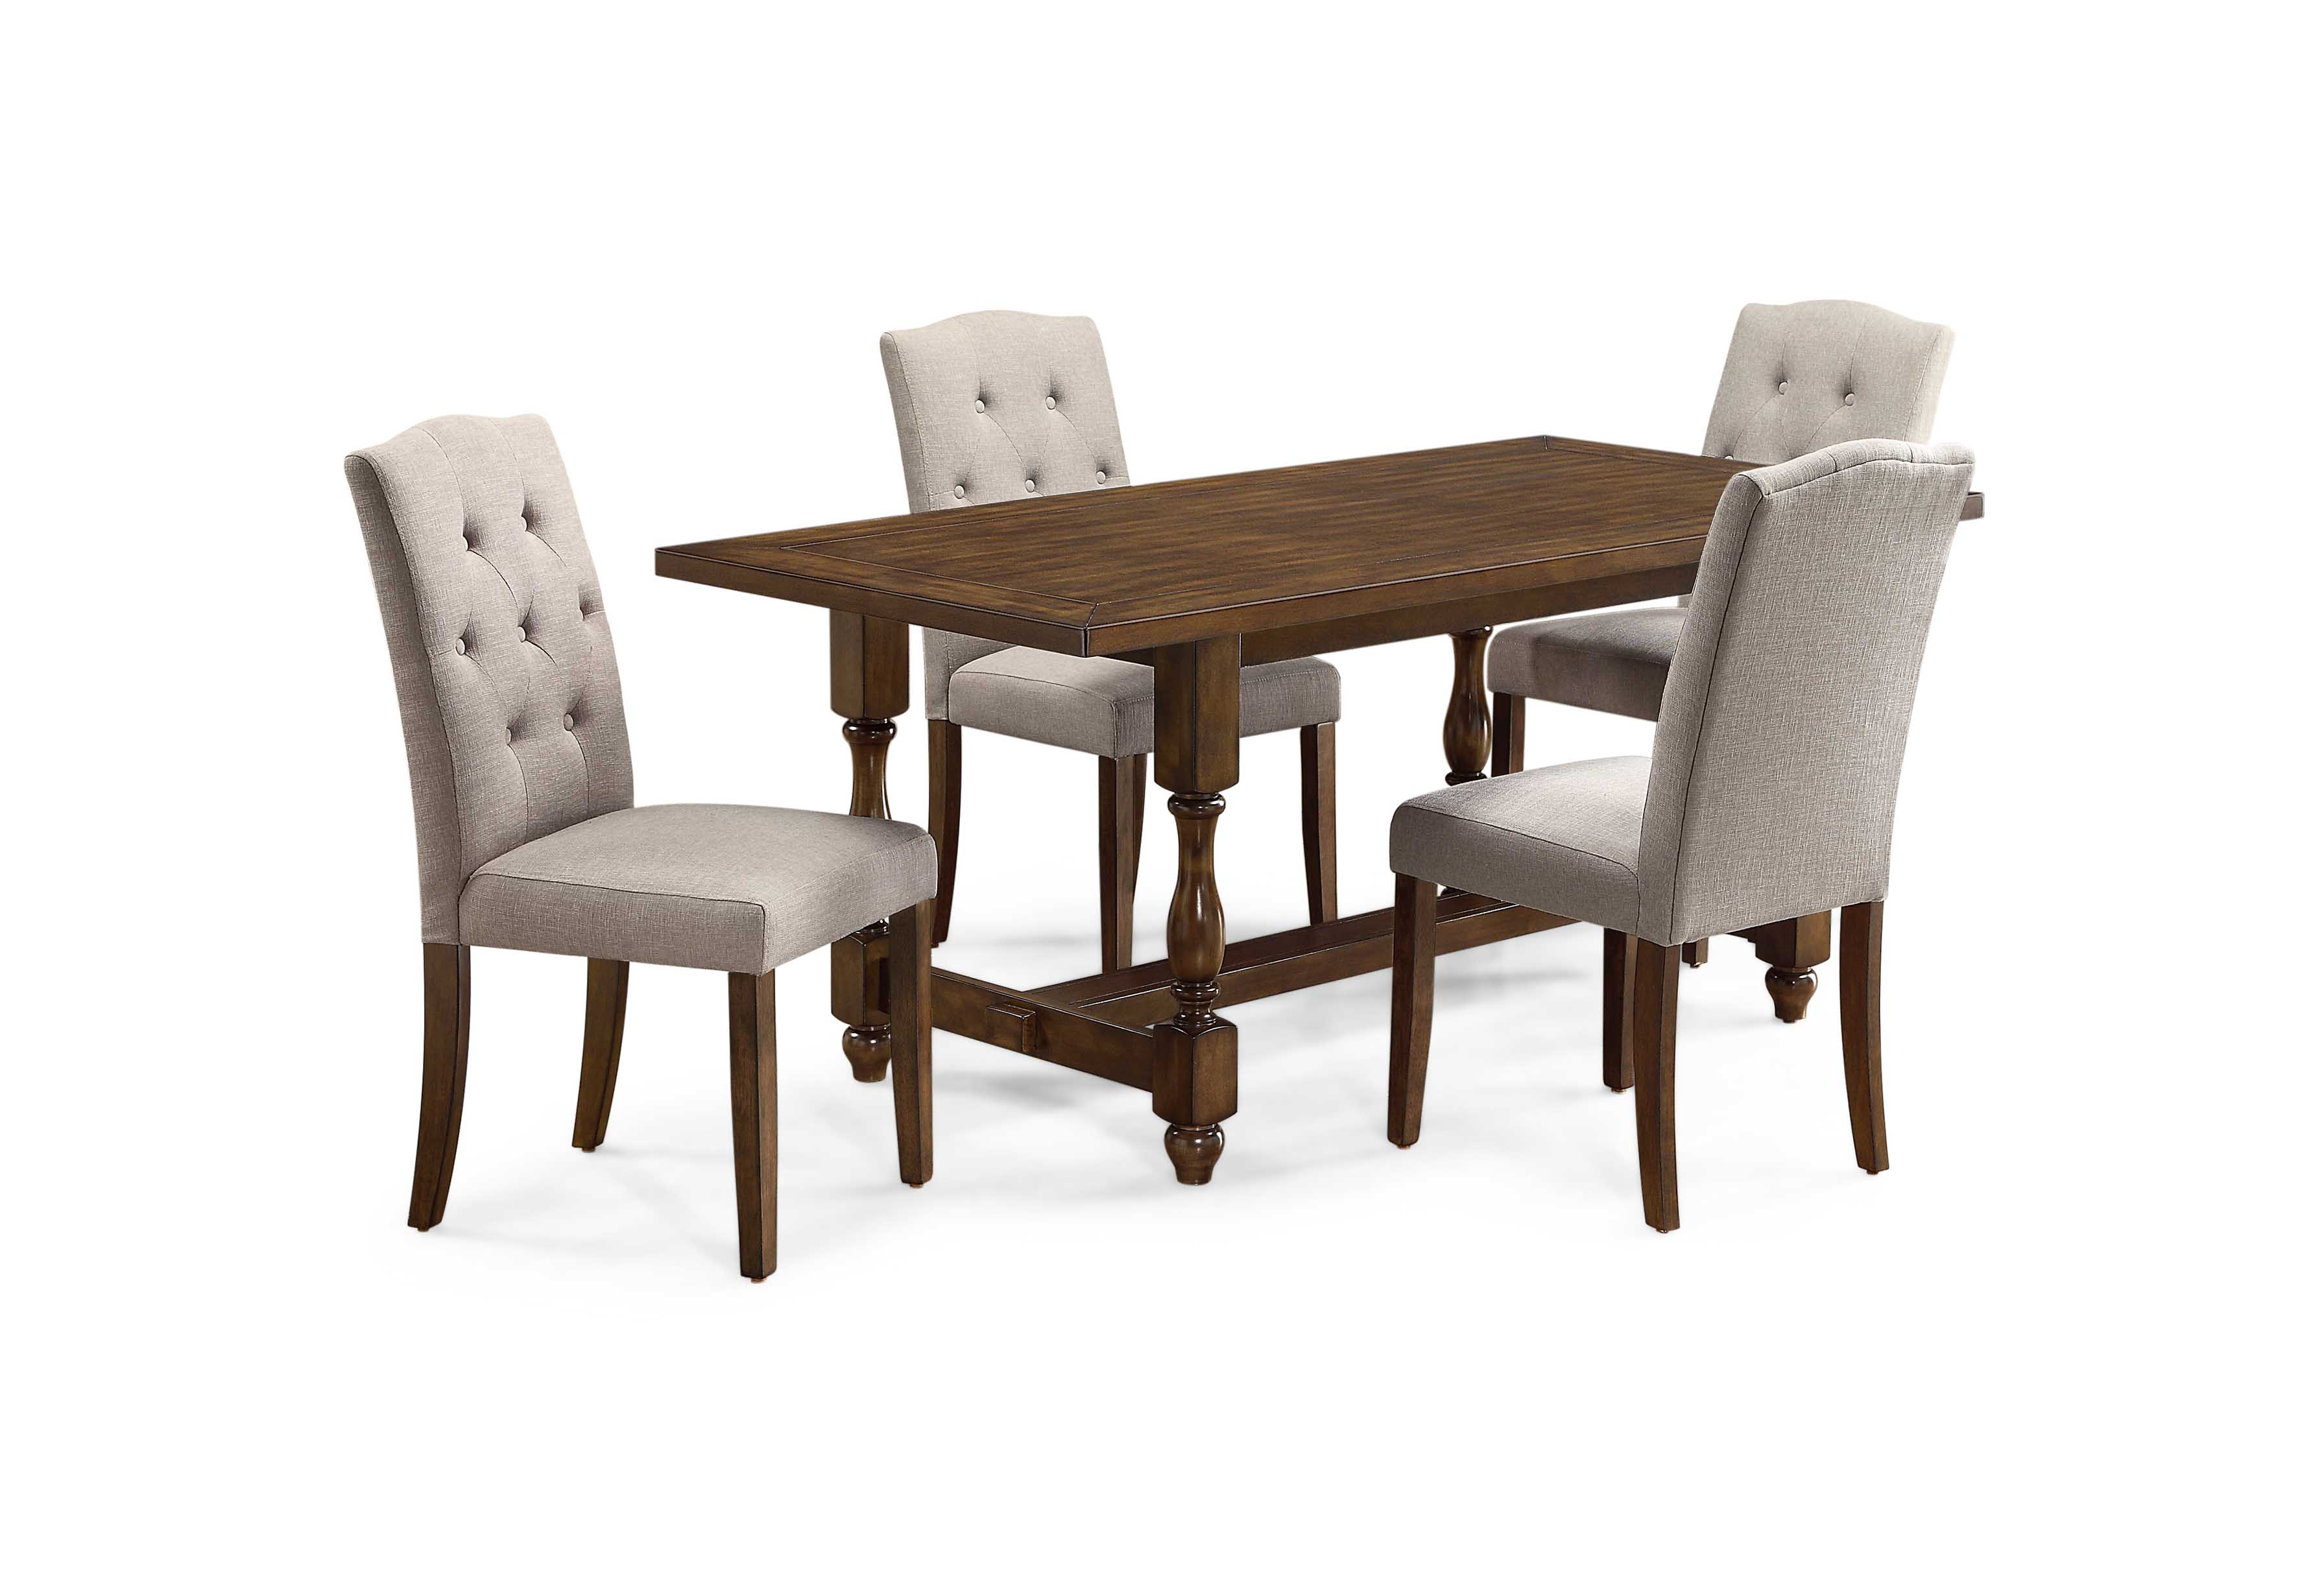 Better Homes & Gardens Providence 5-Piece Dining Set, Brown - image 2 of 7